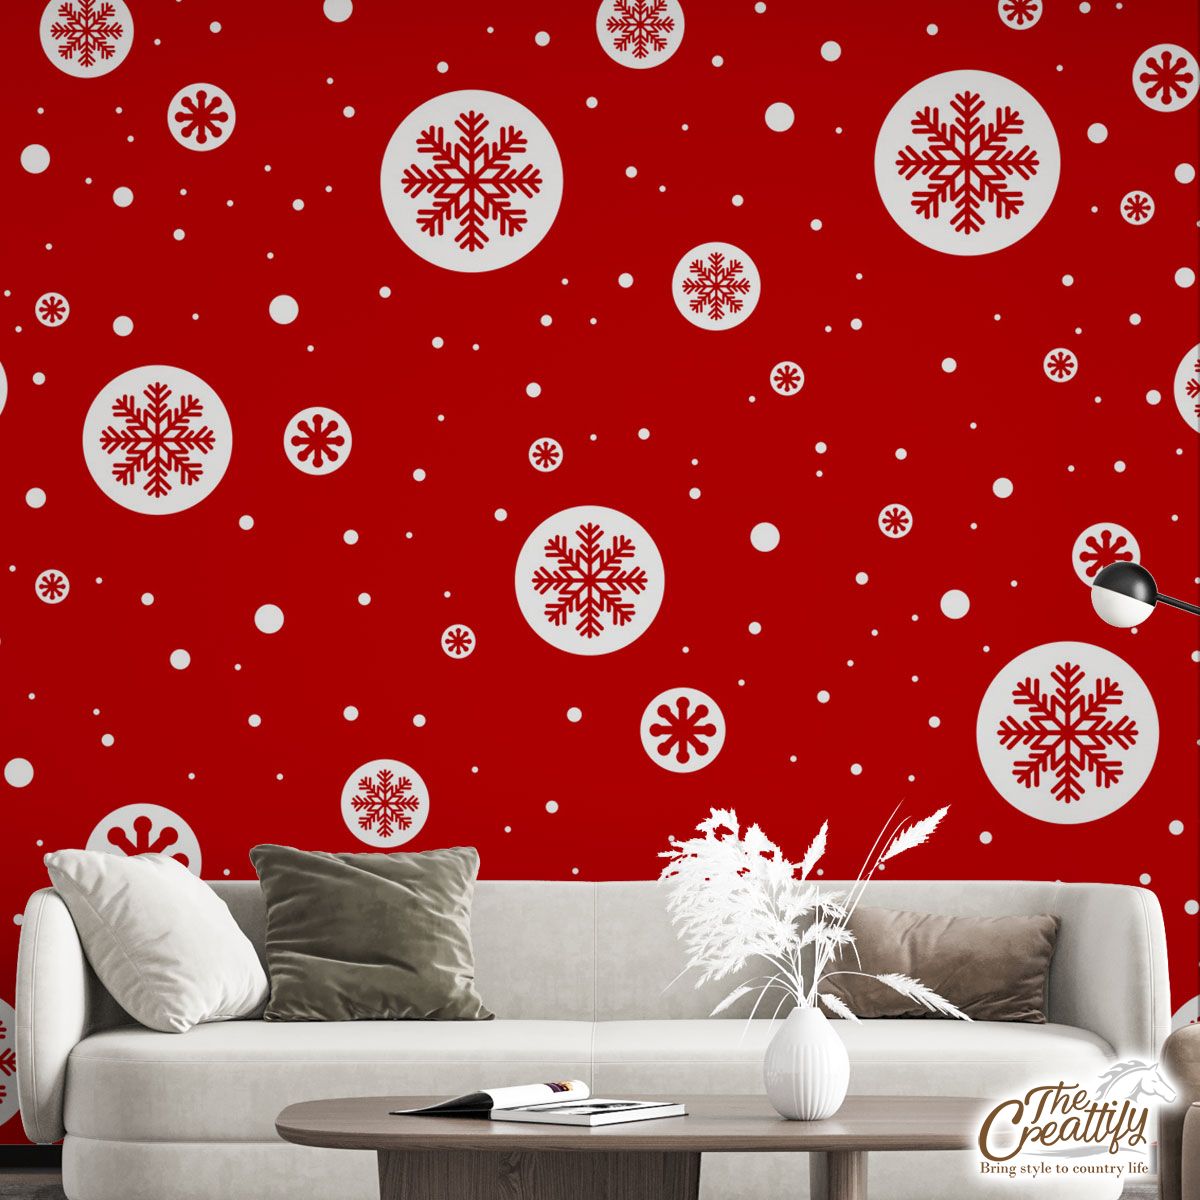 Snowflake Clipart On The Red Background Wall Mural